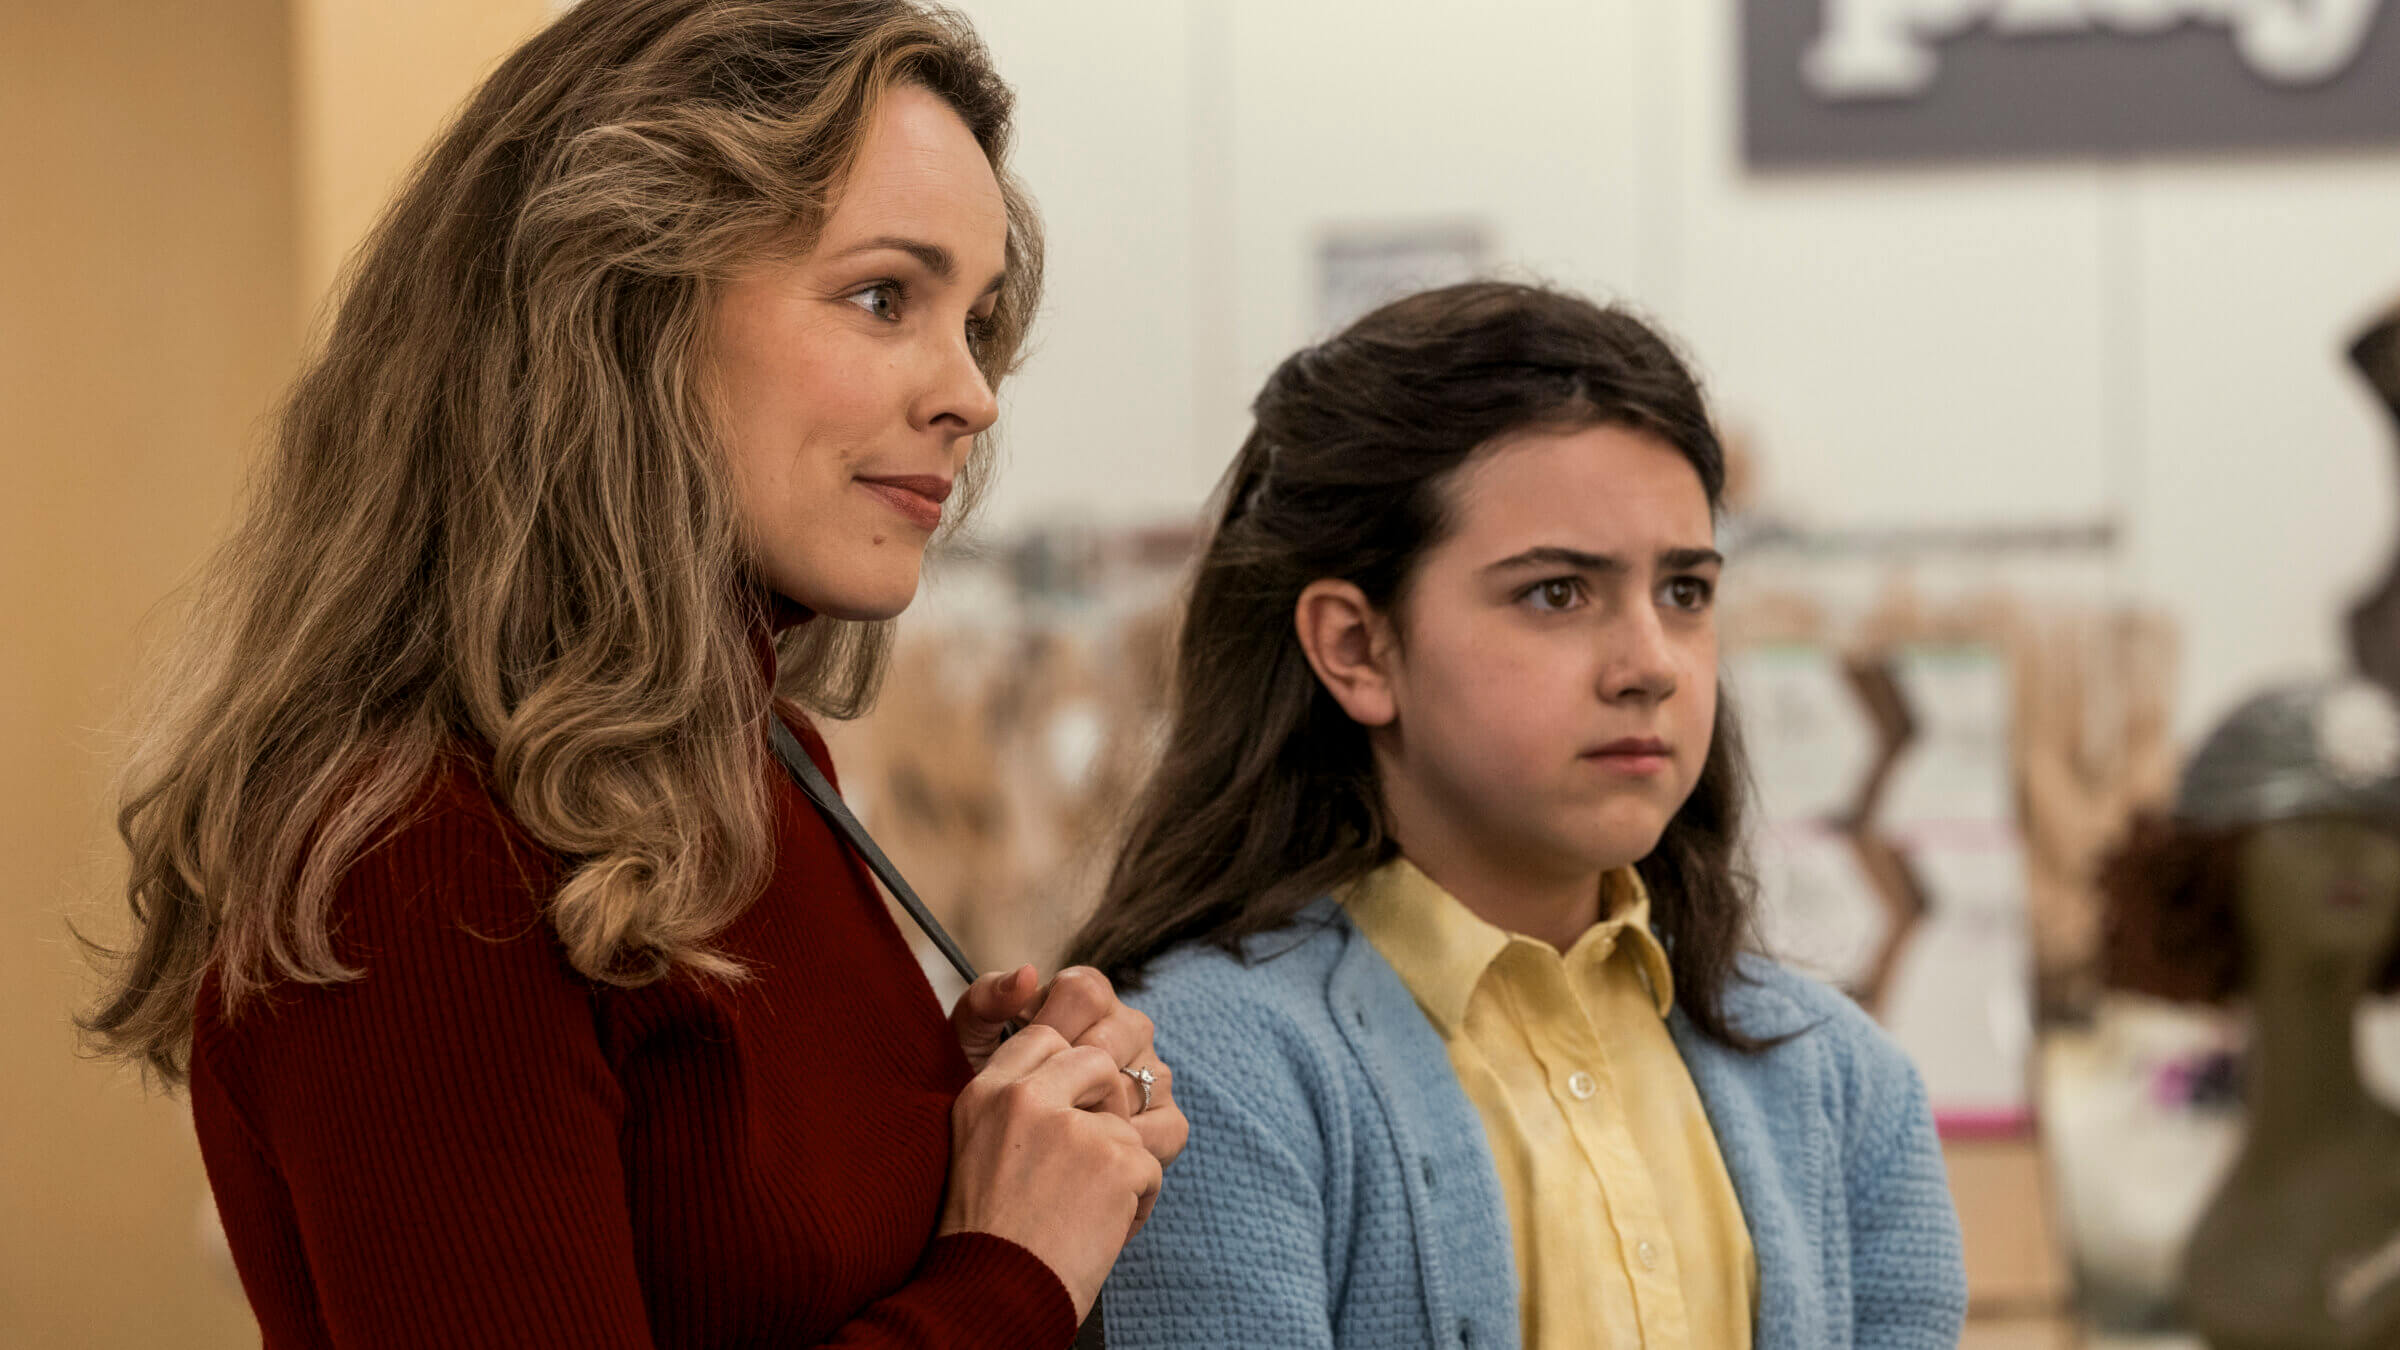 Barbara (Rachel McAdams) and Margaret (Abby Ryder Fortson), the mother and daughter at the heart of 'Are You There, God? It's Me, Margaret' feeling awkward in the lingerie department. 